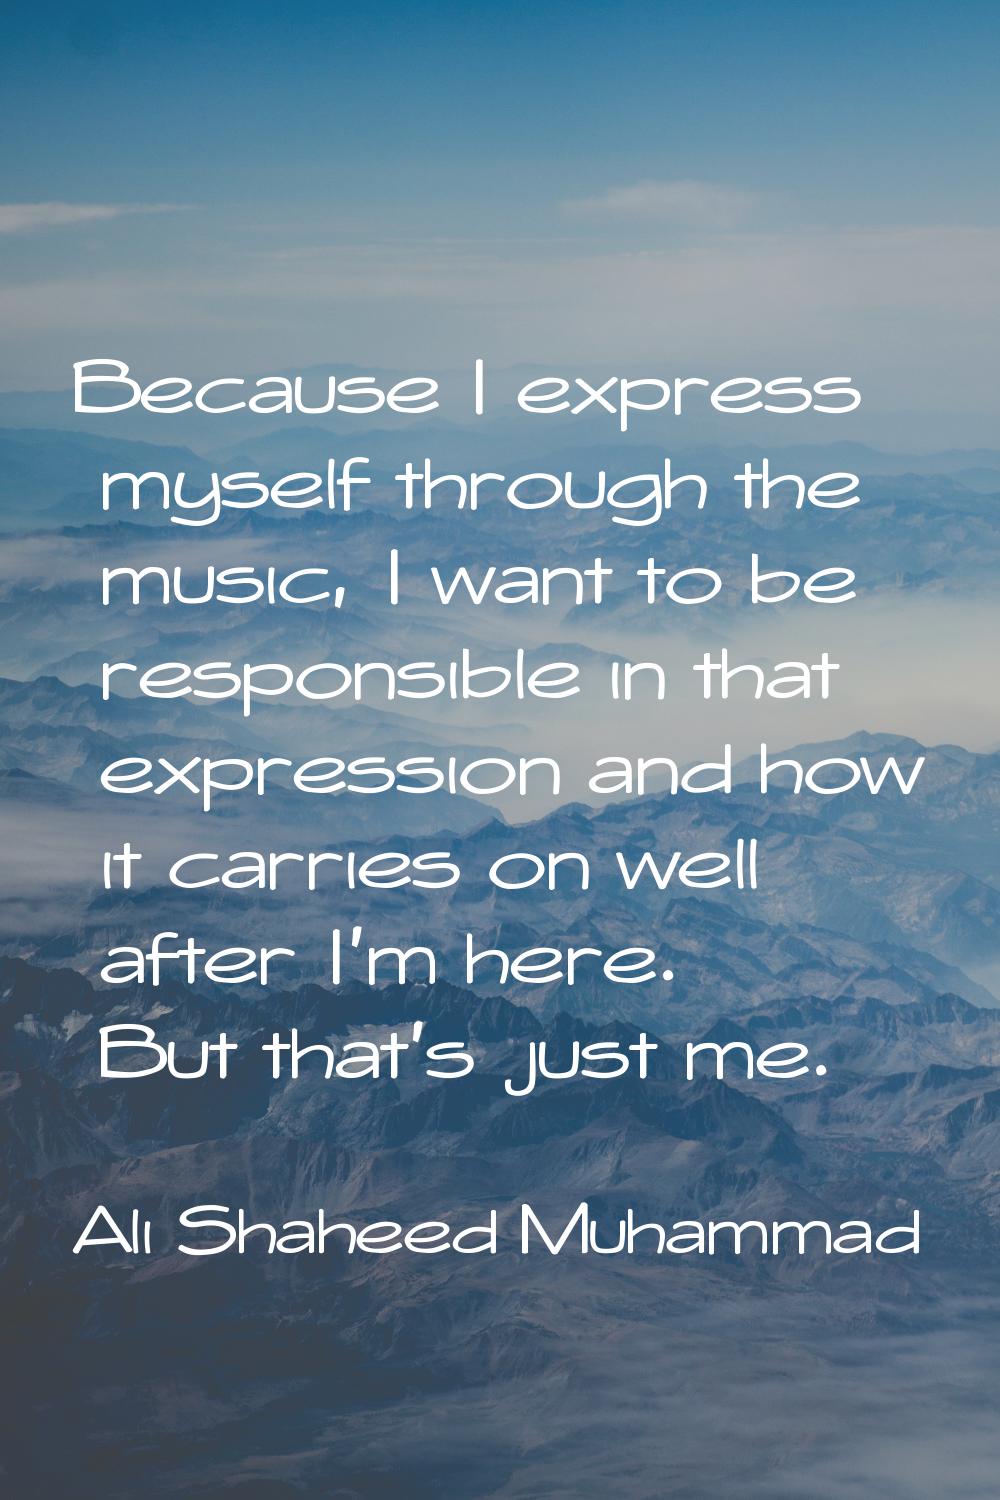 Because I express myself through the music, I want to be responsible in that expression and how it 